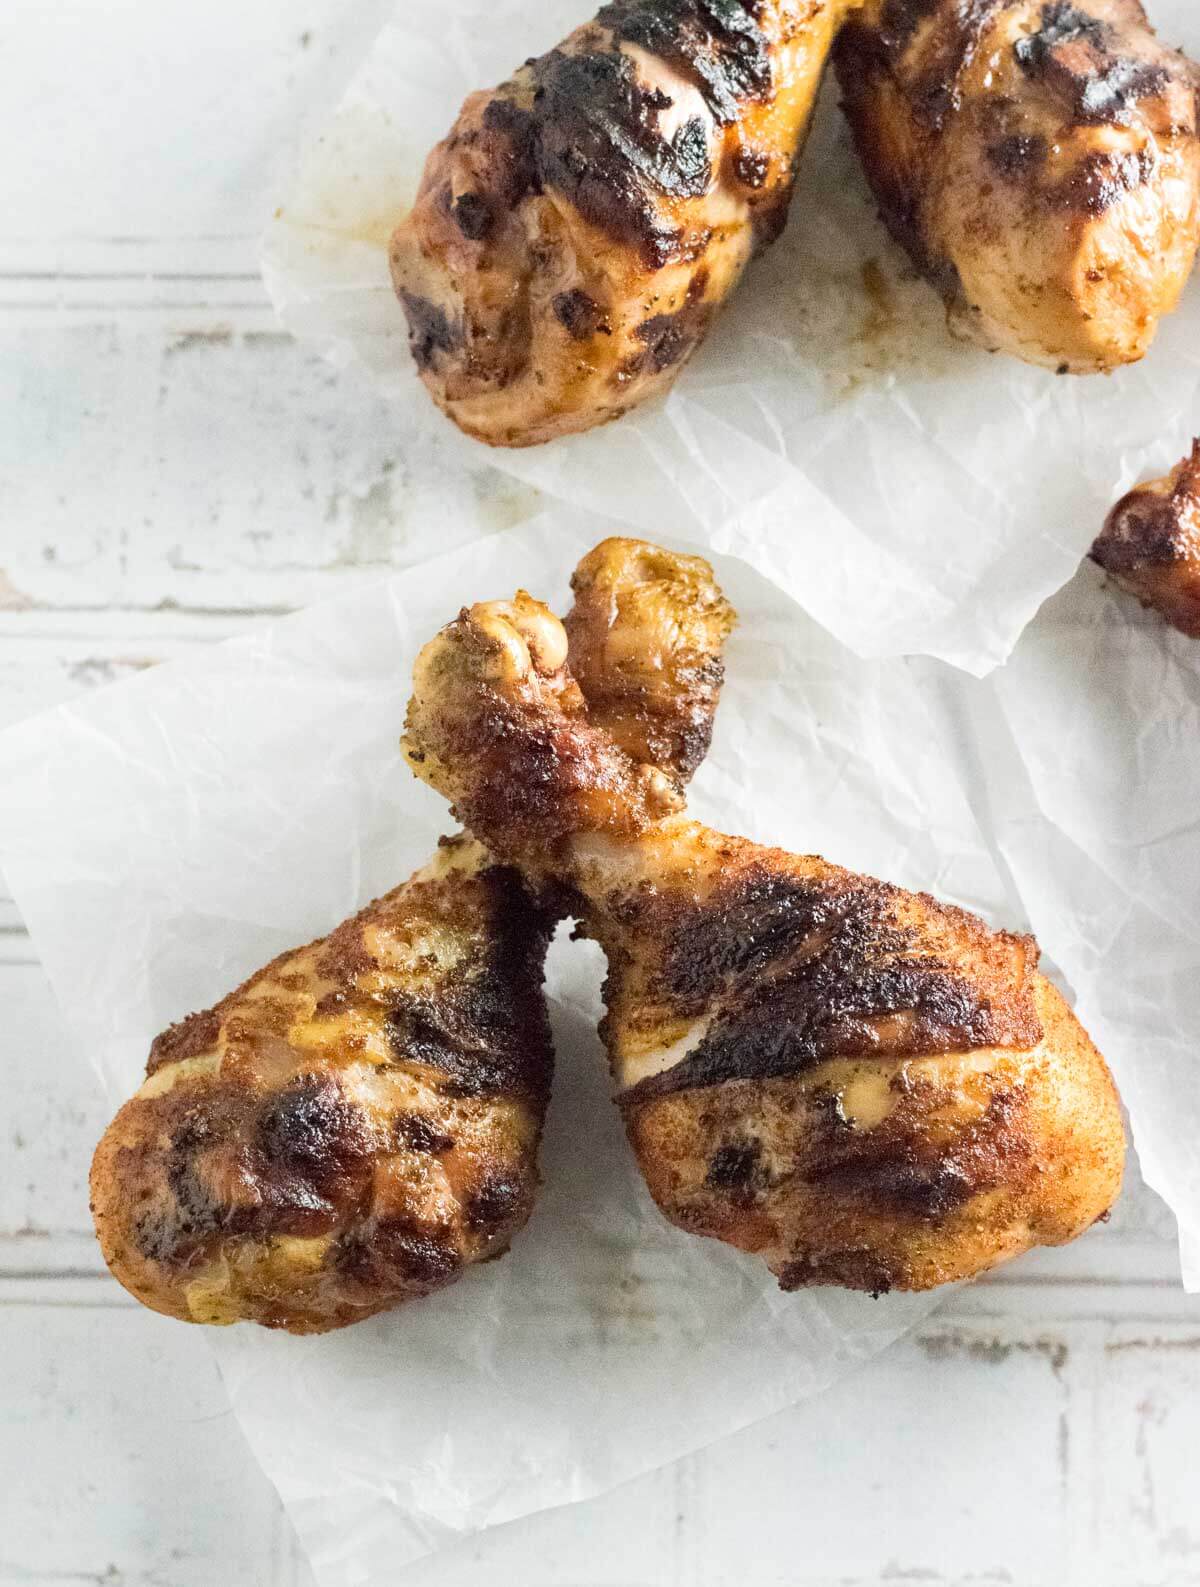 Sprice rubbed chicken drumsticks viewed from above.